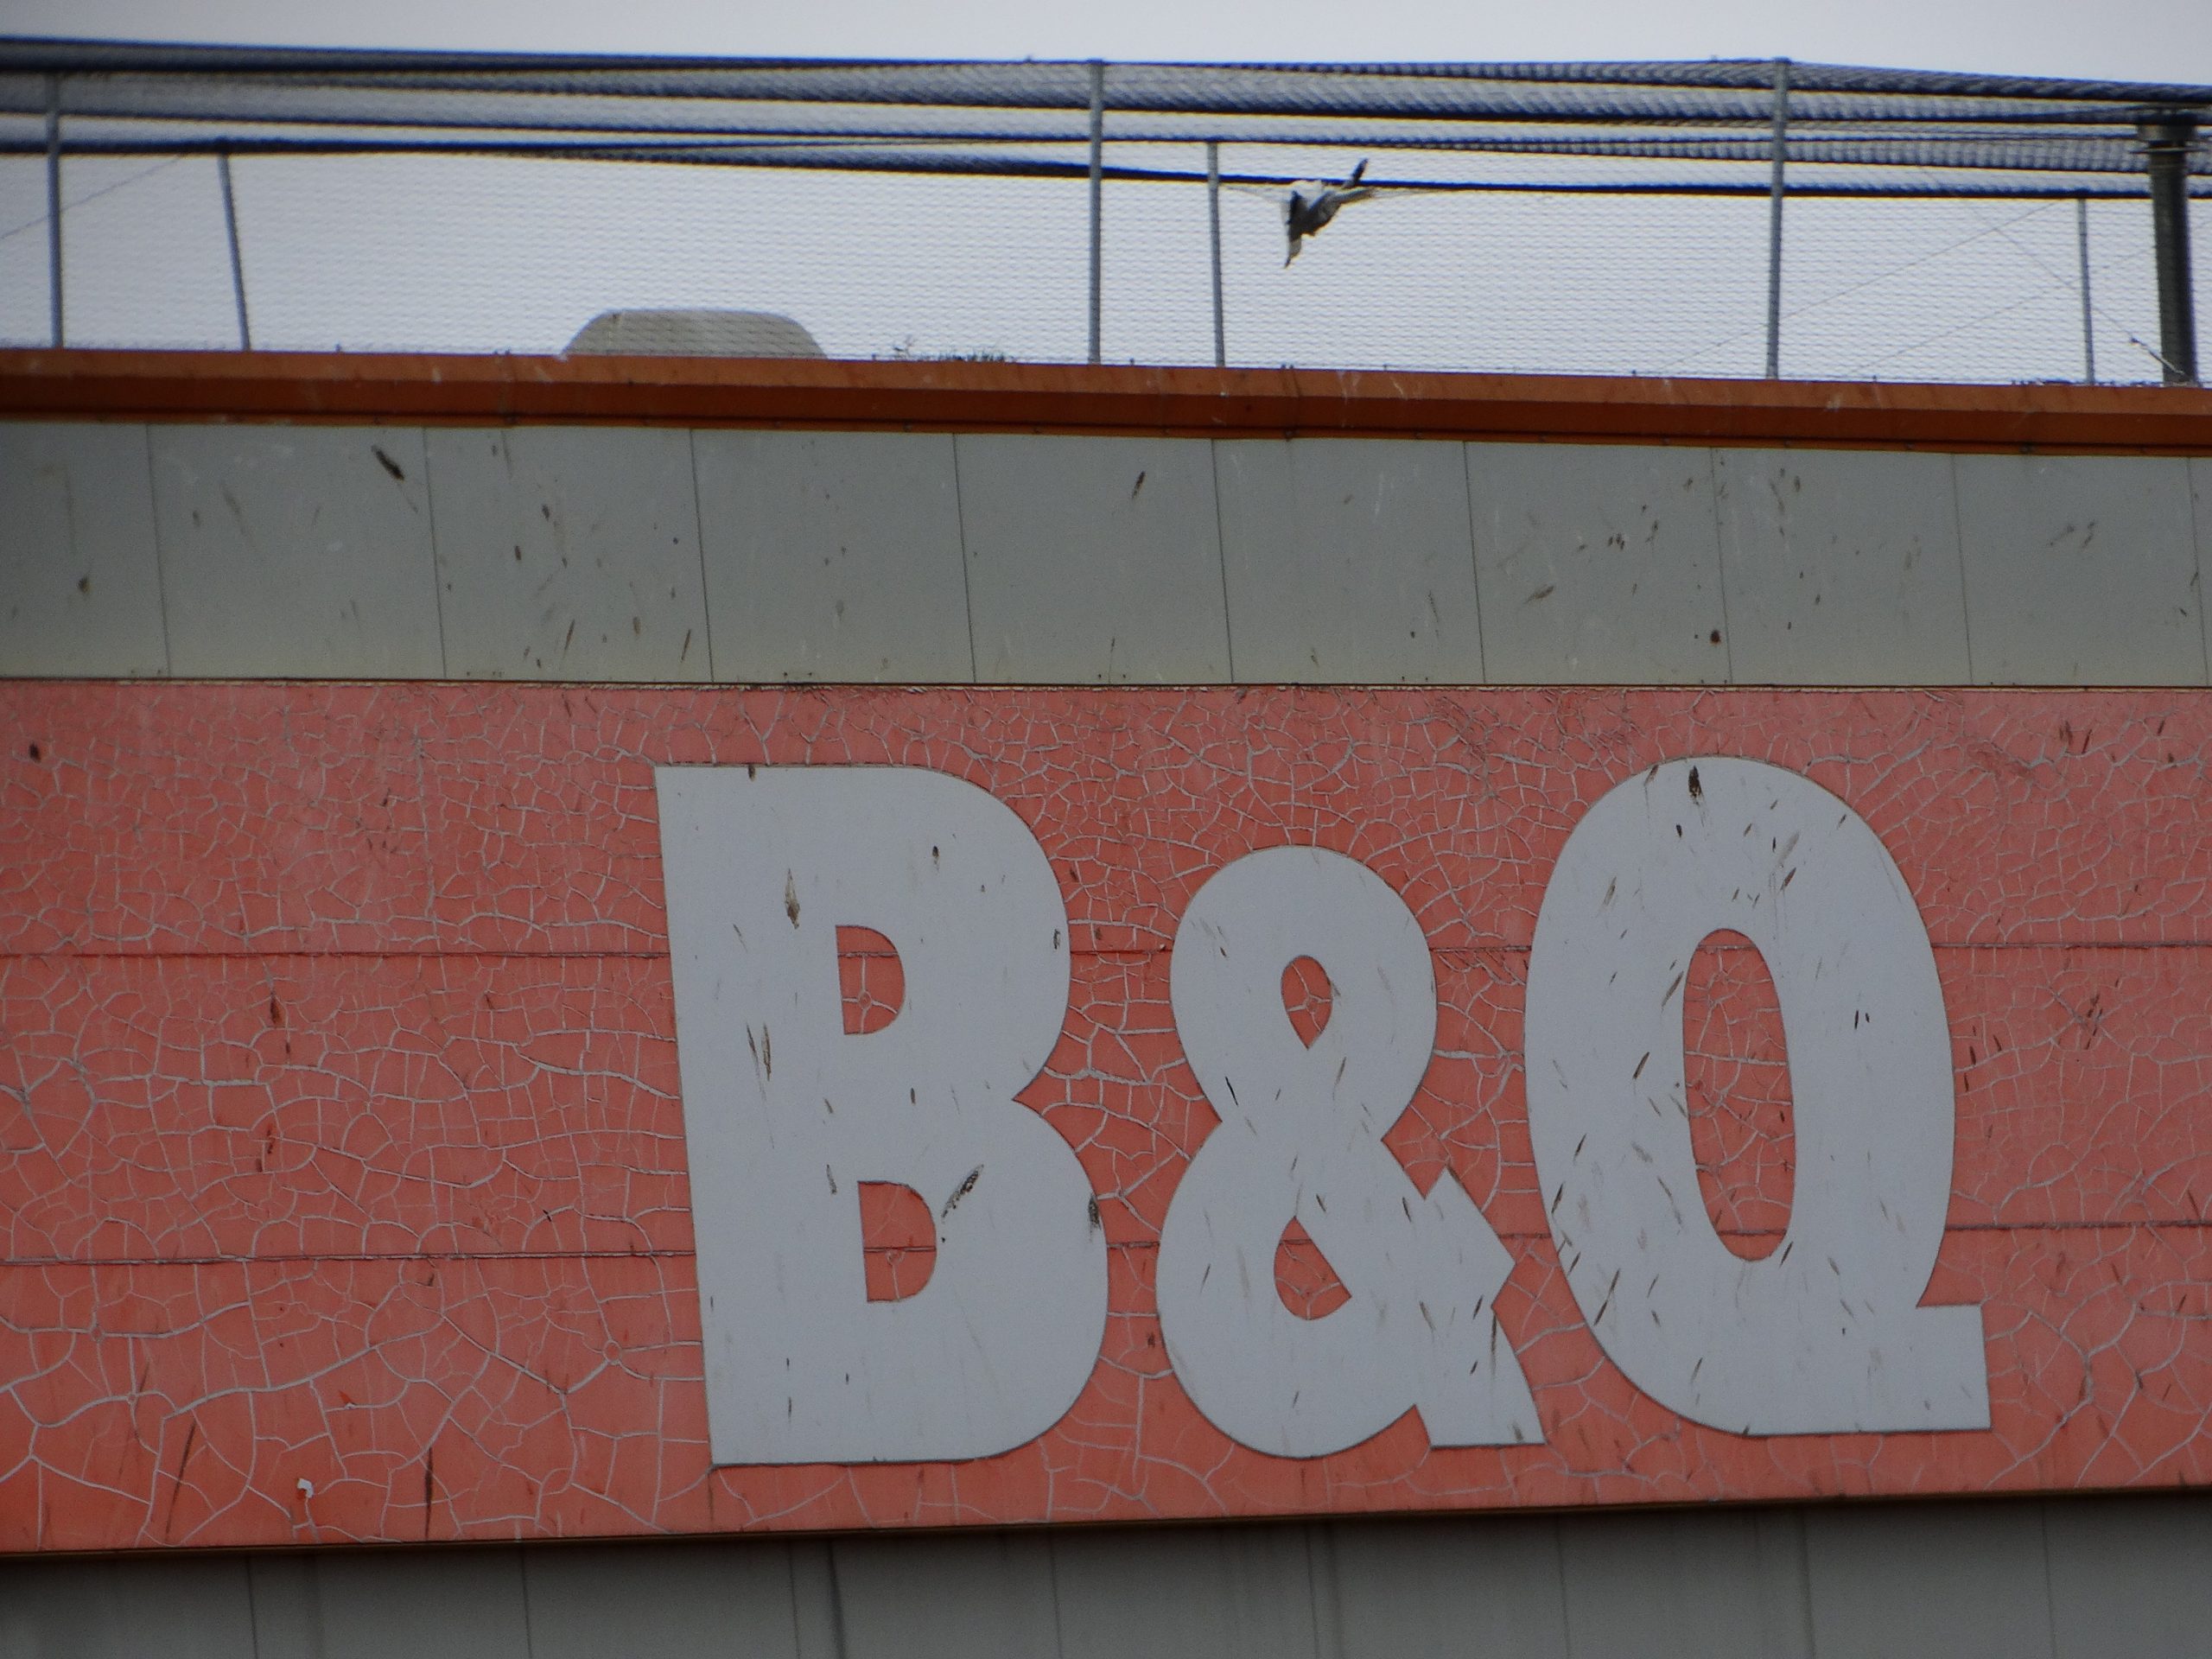 Birds trapped on B&Q Arbroath's roof.